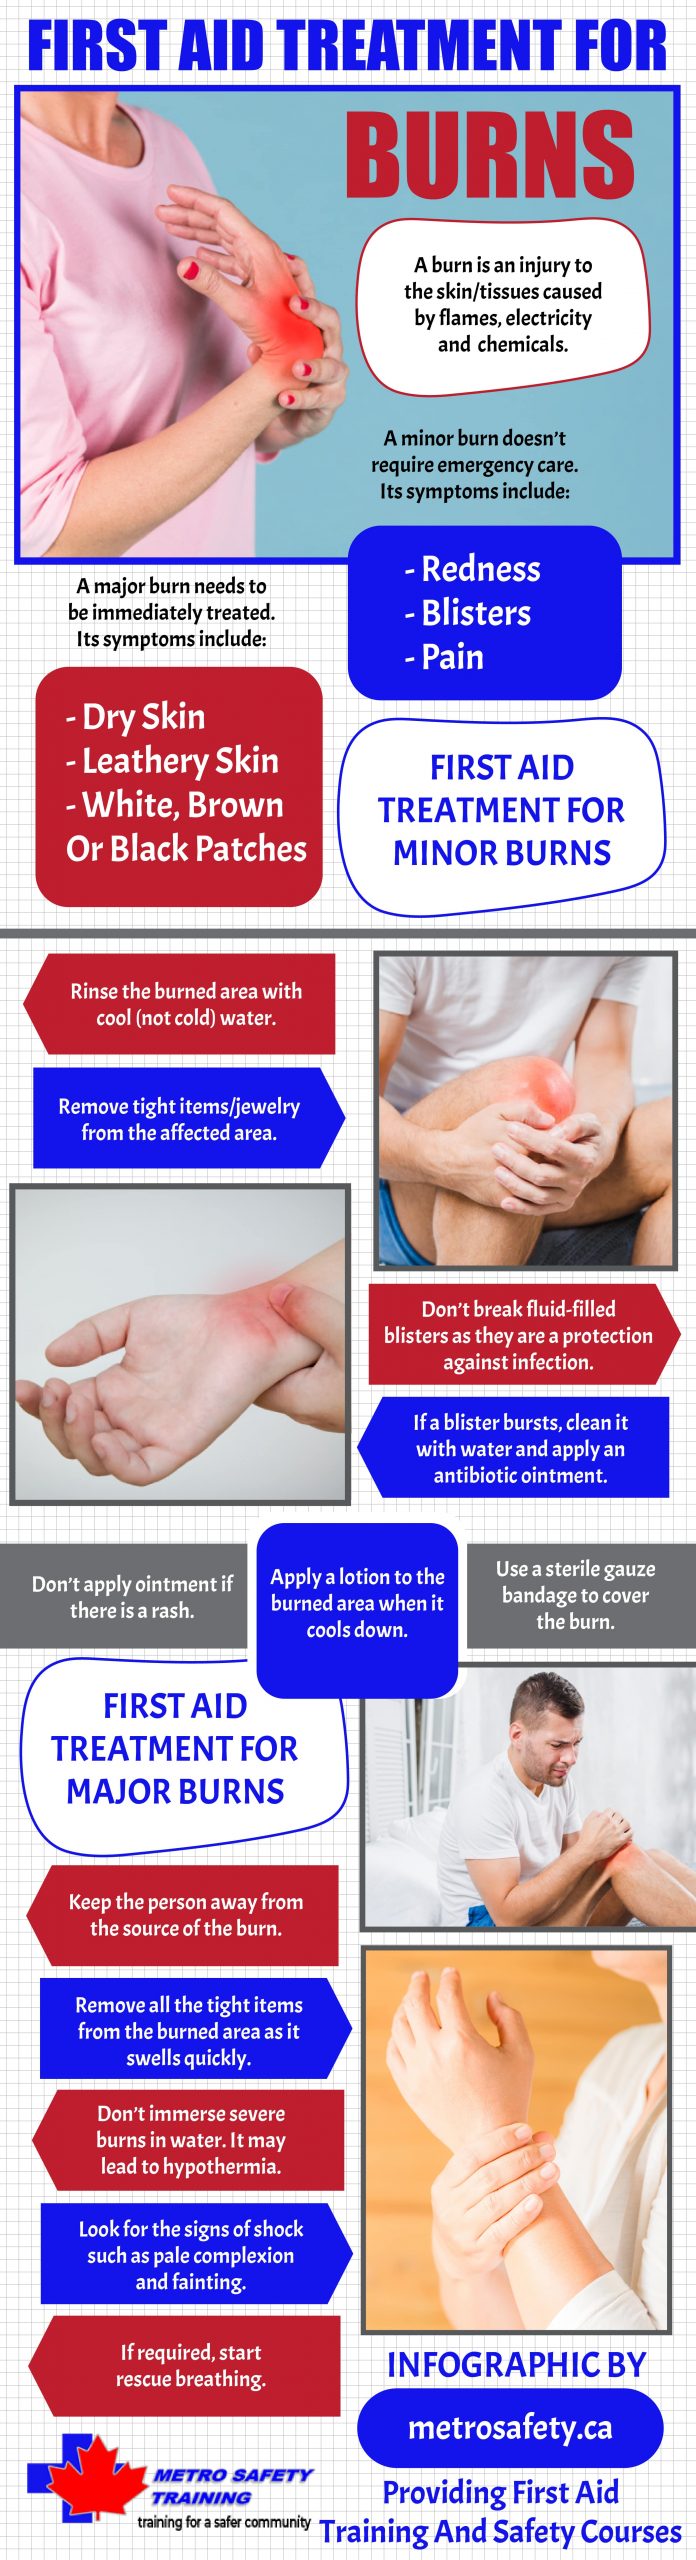 First Aid Treatments for Burns